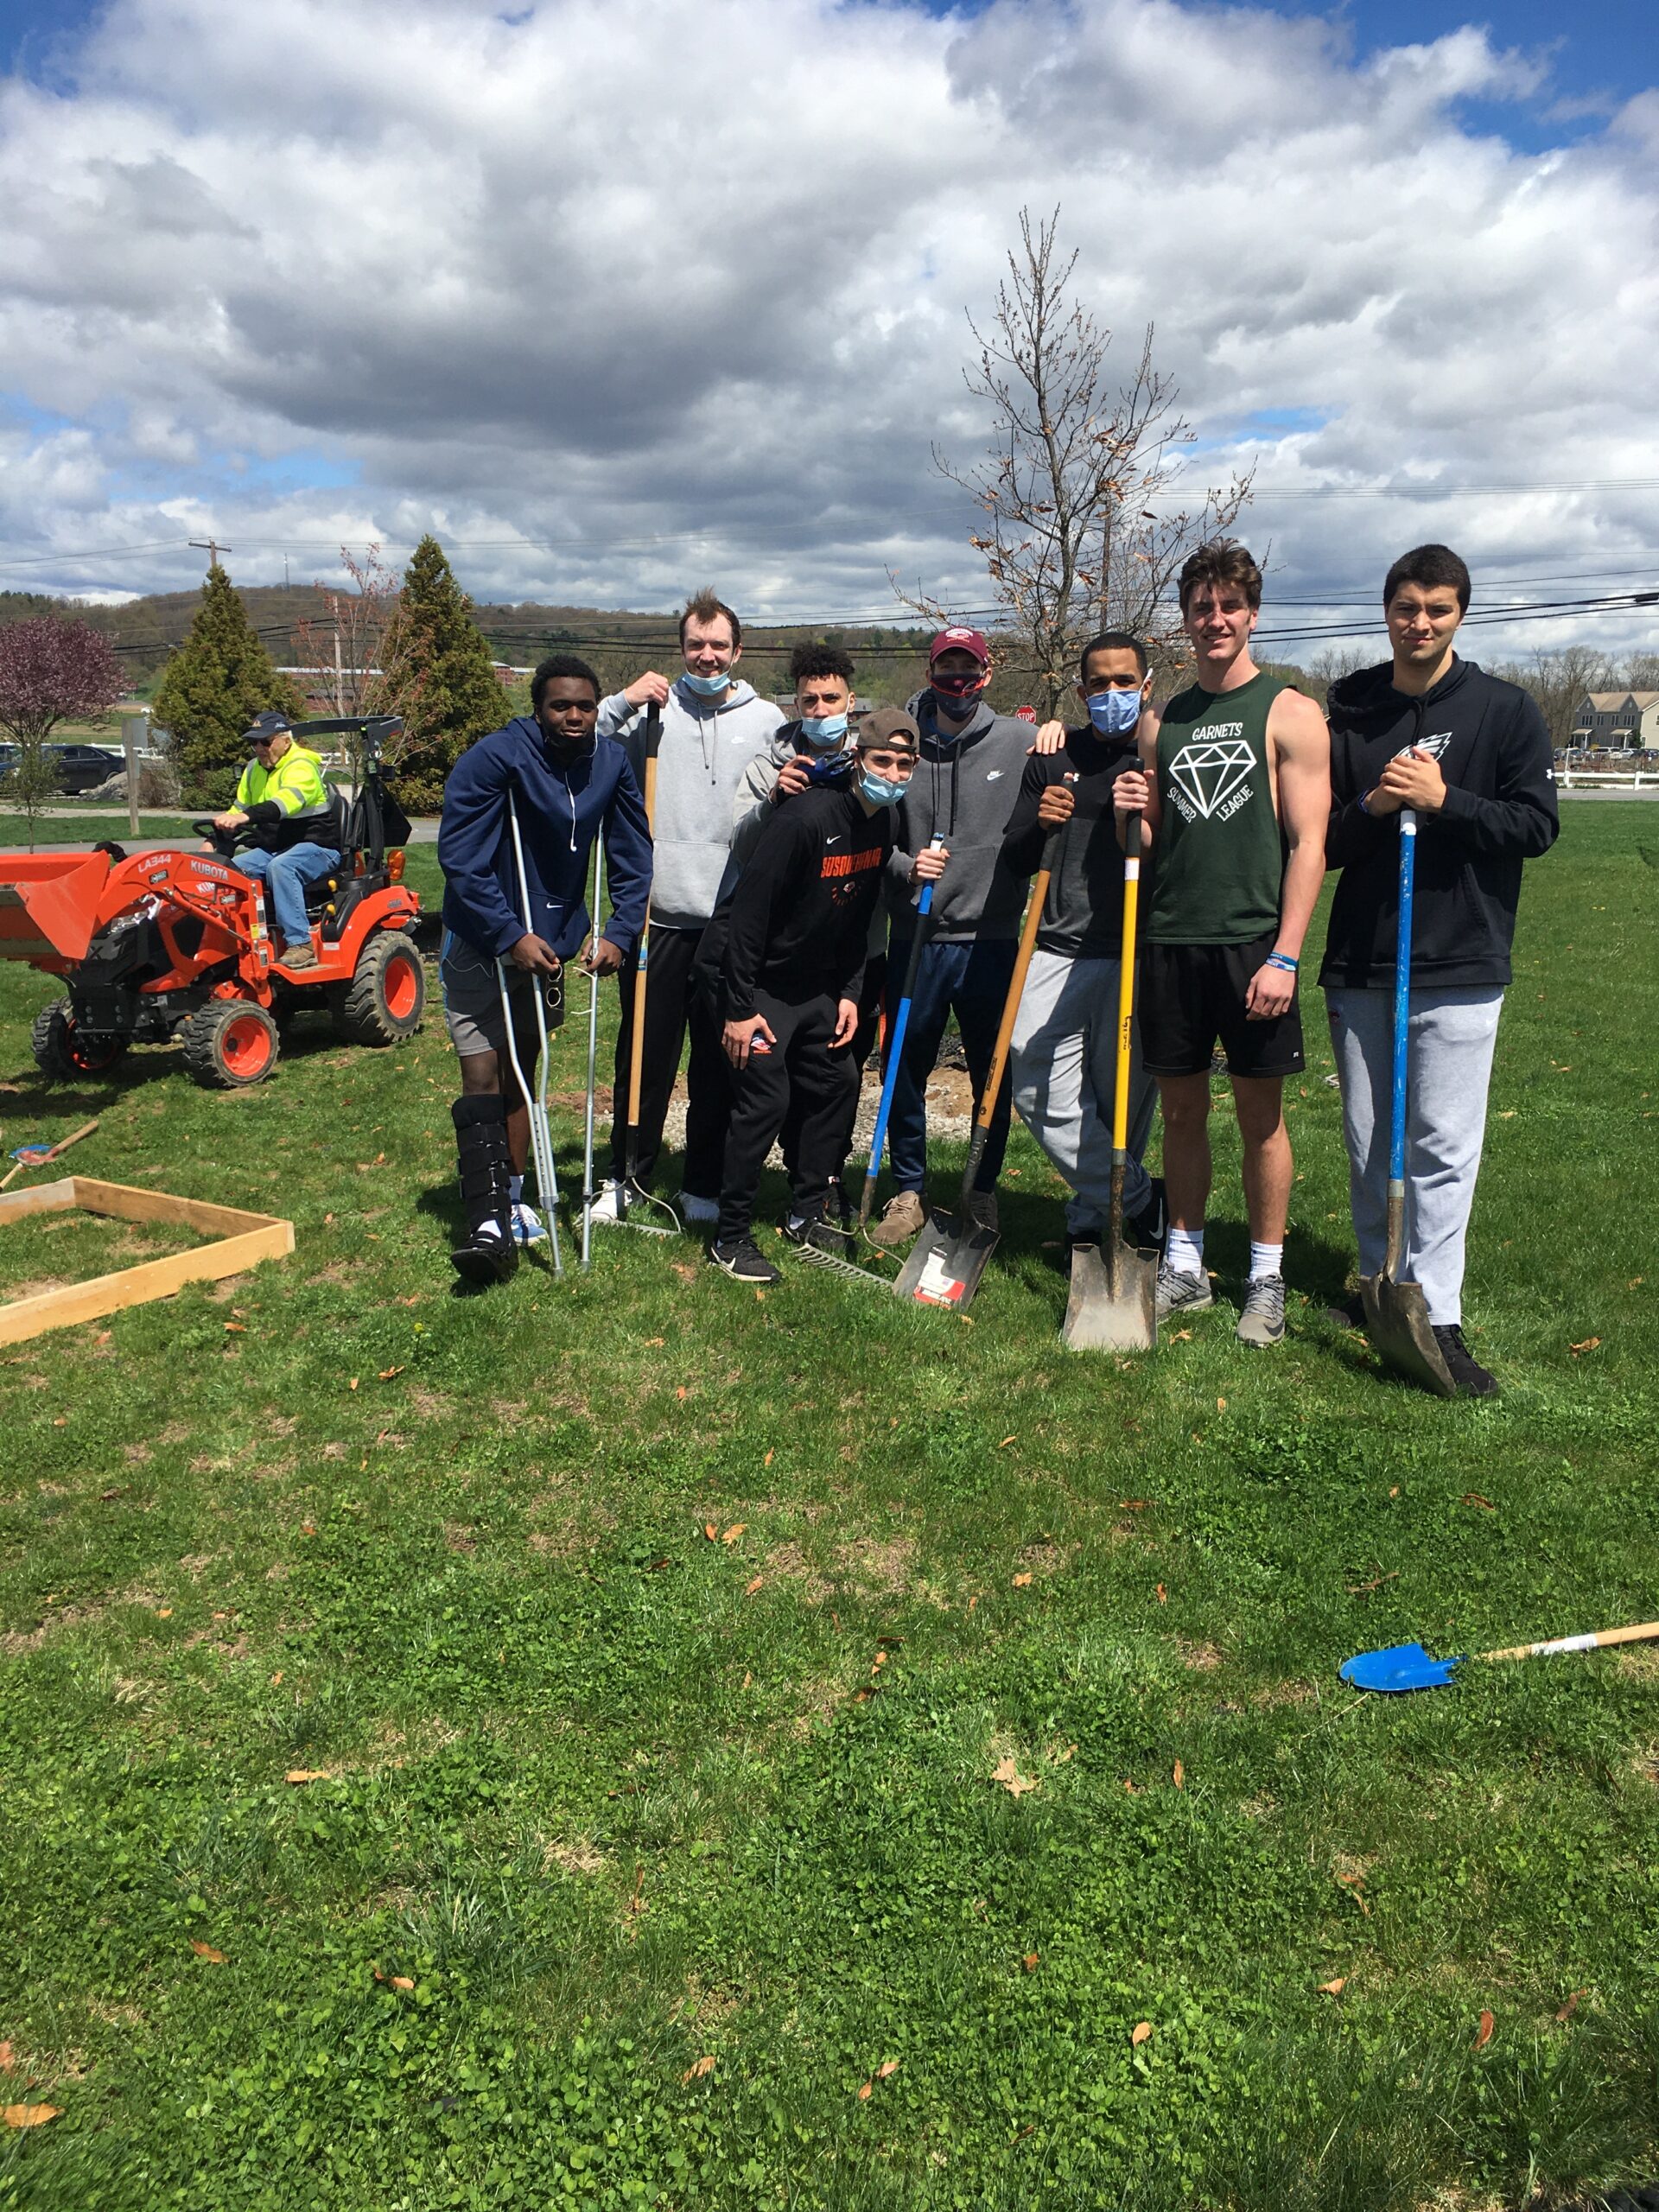 Susquehanna University Basketball Teams Assist with Spring Clean Up